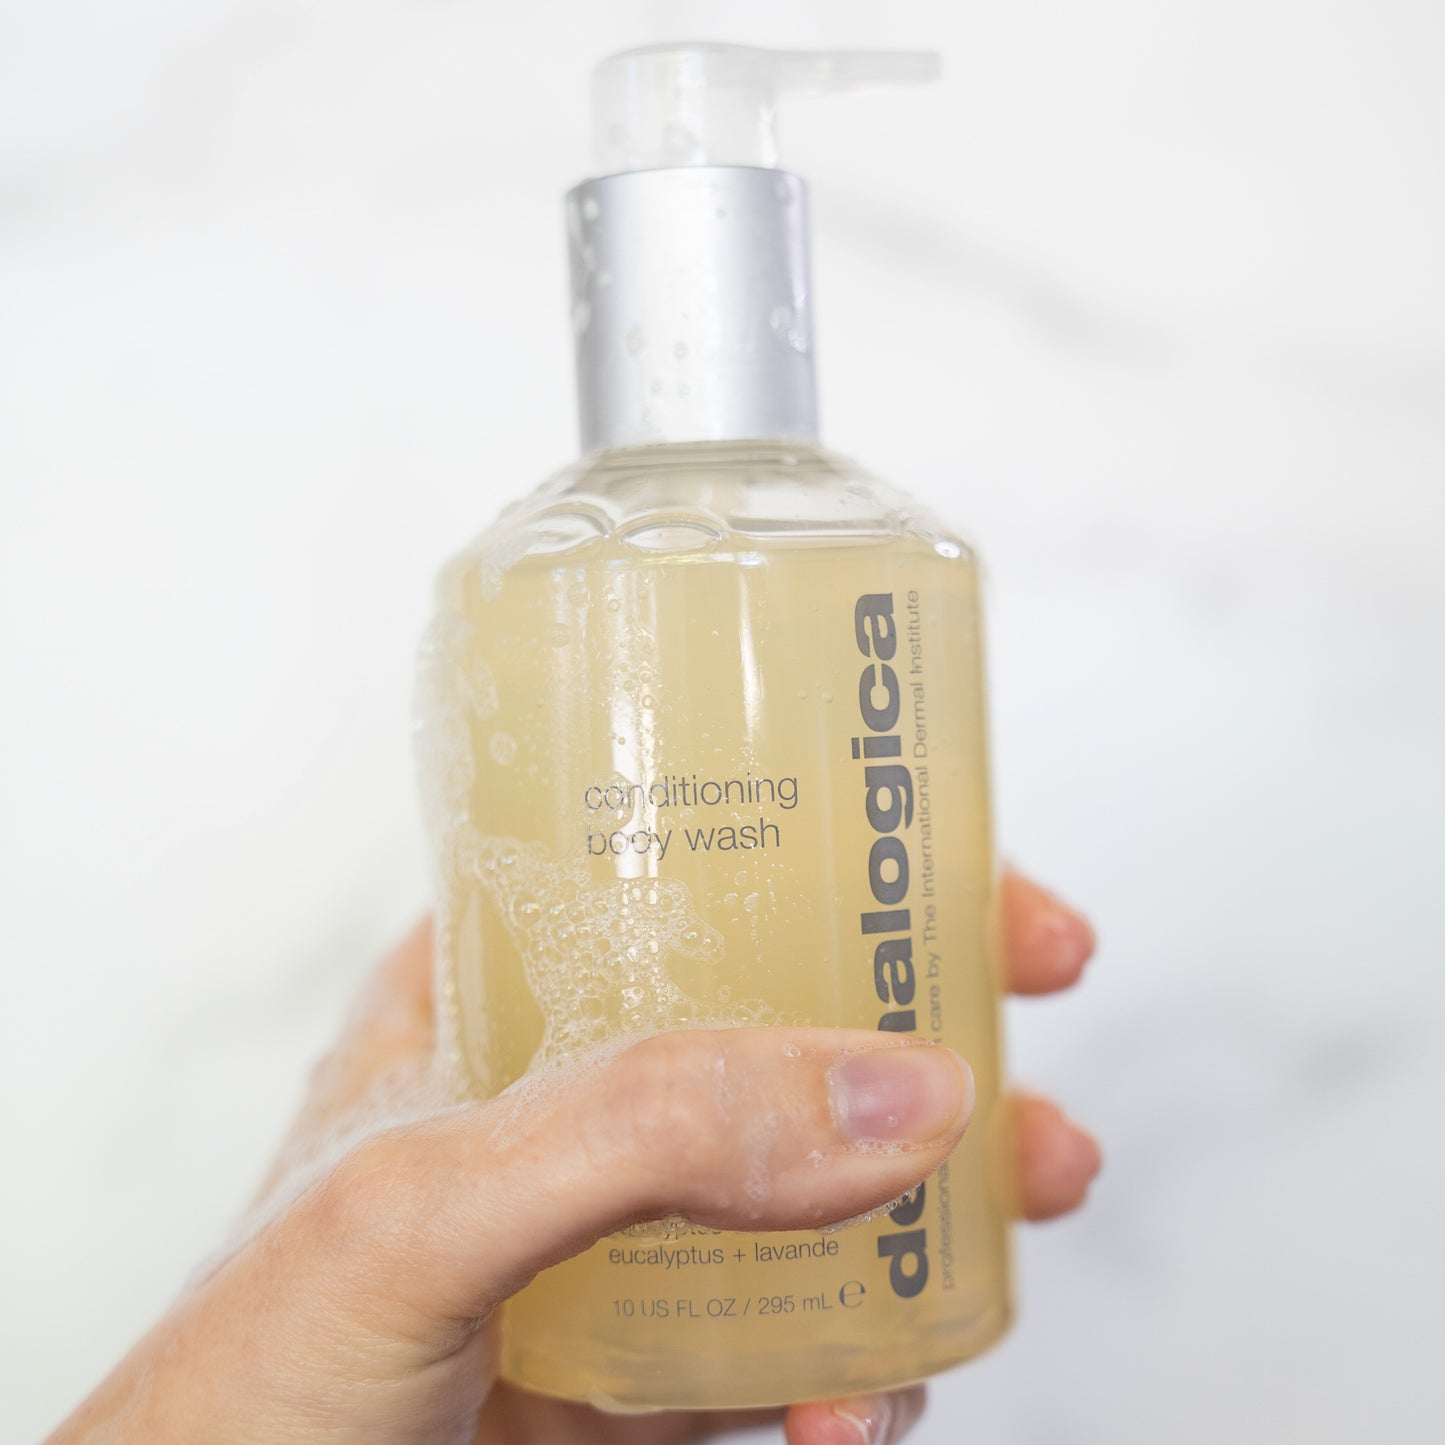 Dermalogica Body Conditioning Wash bottle in hand with bubbles